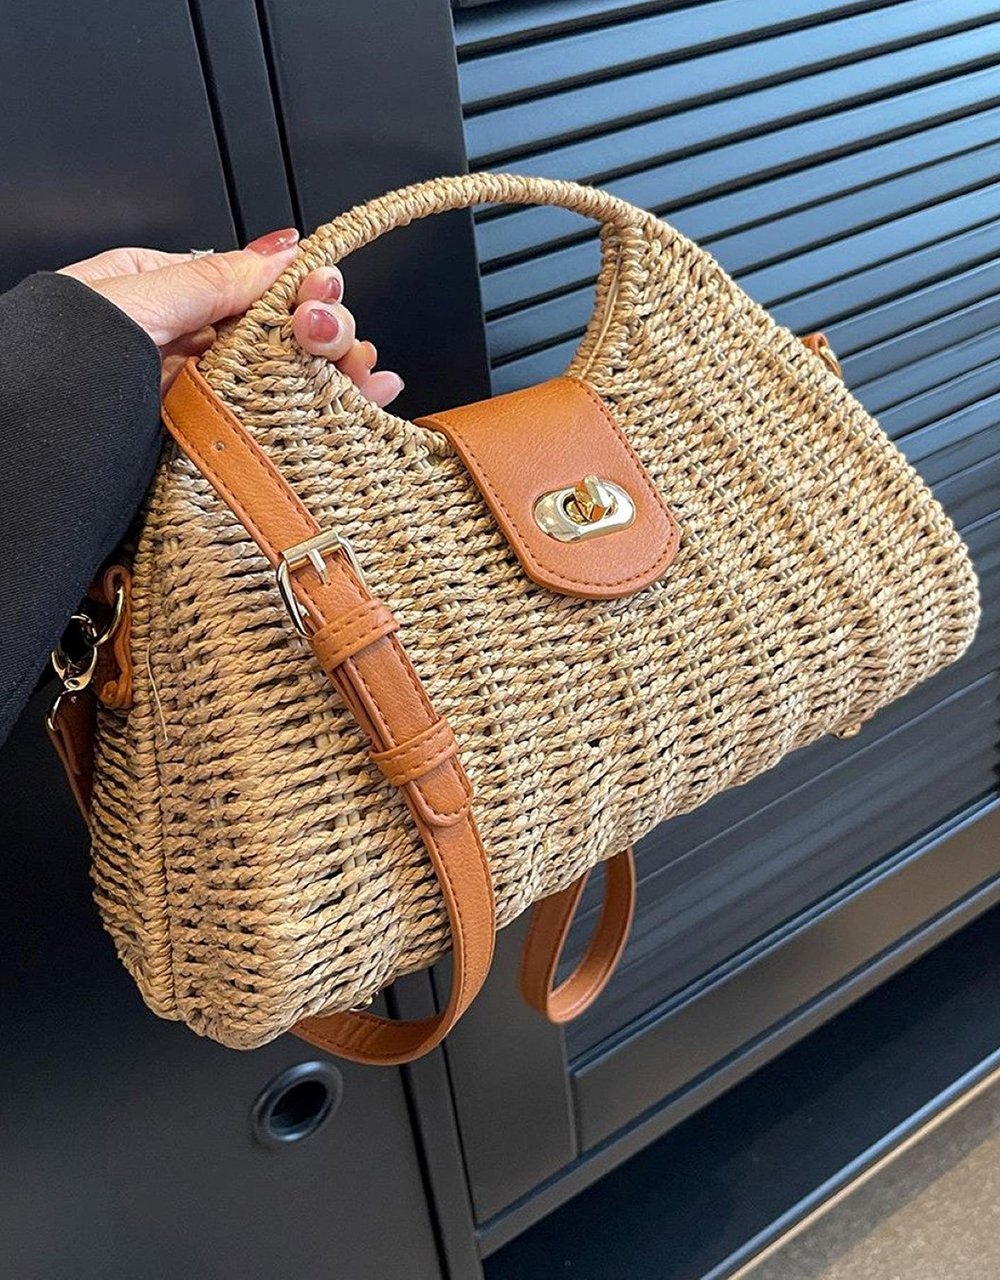 Best of Etsy : Woven Bags - roomfortuesday.com